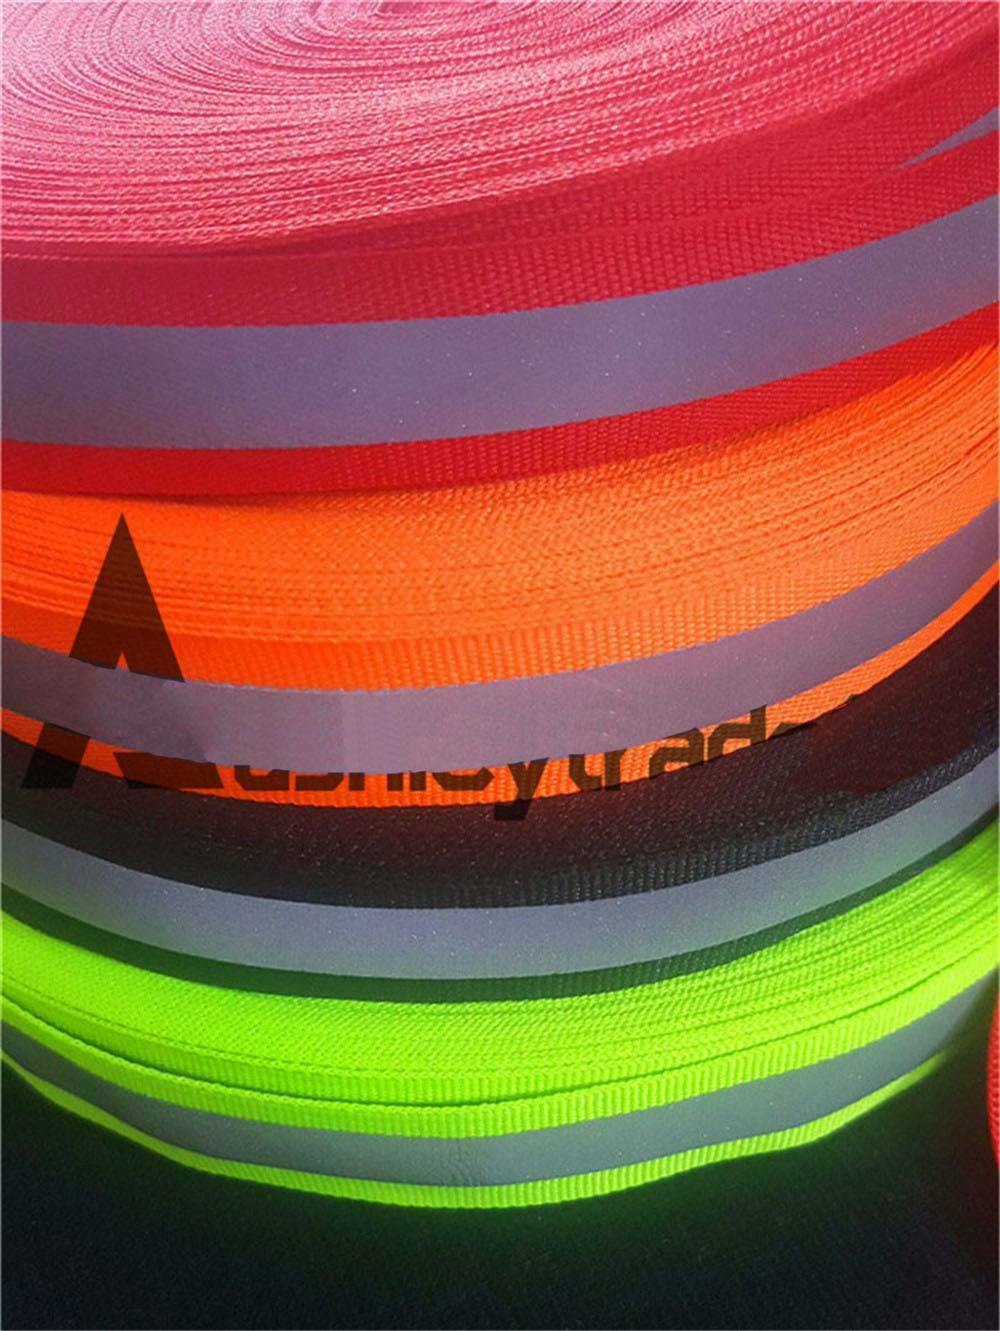 1 inch Reflective Orange Gray Tape Sew On Trim Fabric Material 6M = 20 Foot